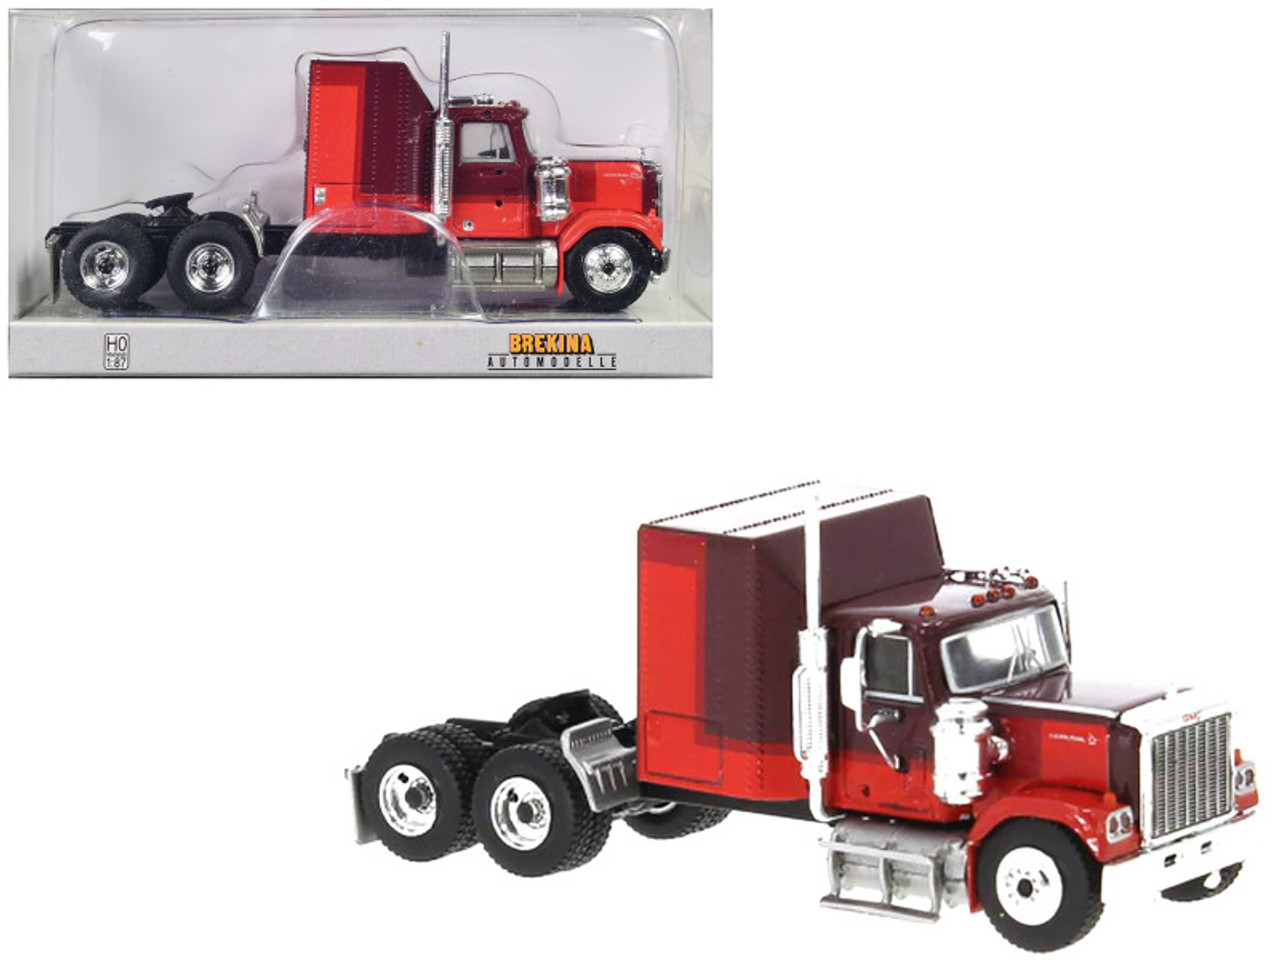 1980 GMC General Truck Tractor Dark Red and Light Red 1/87 (HO) Scale Model Car by Brekina